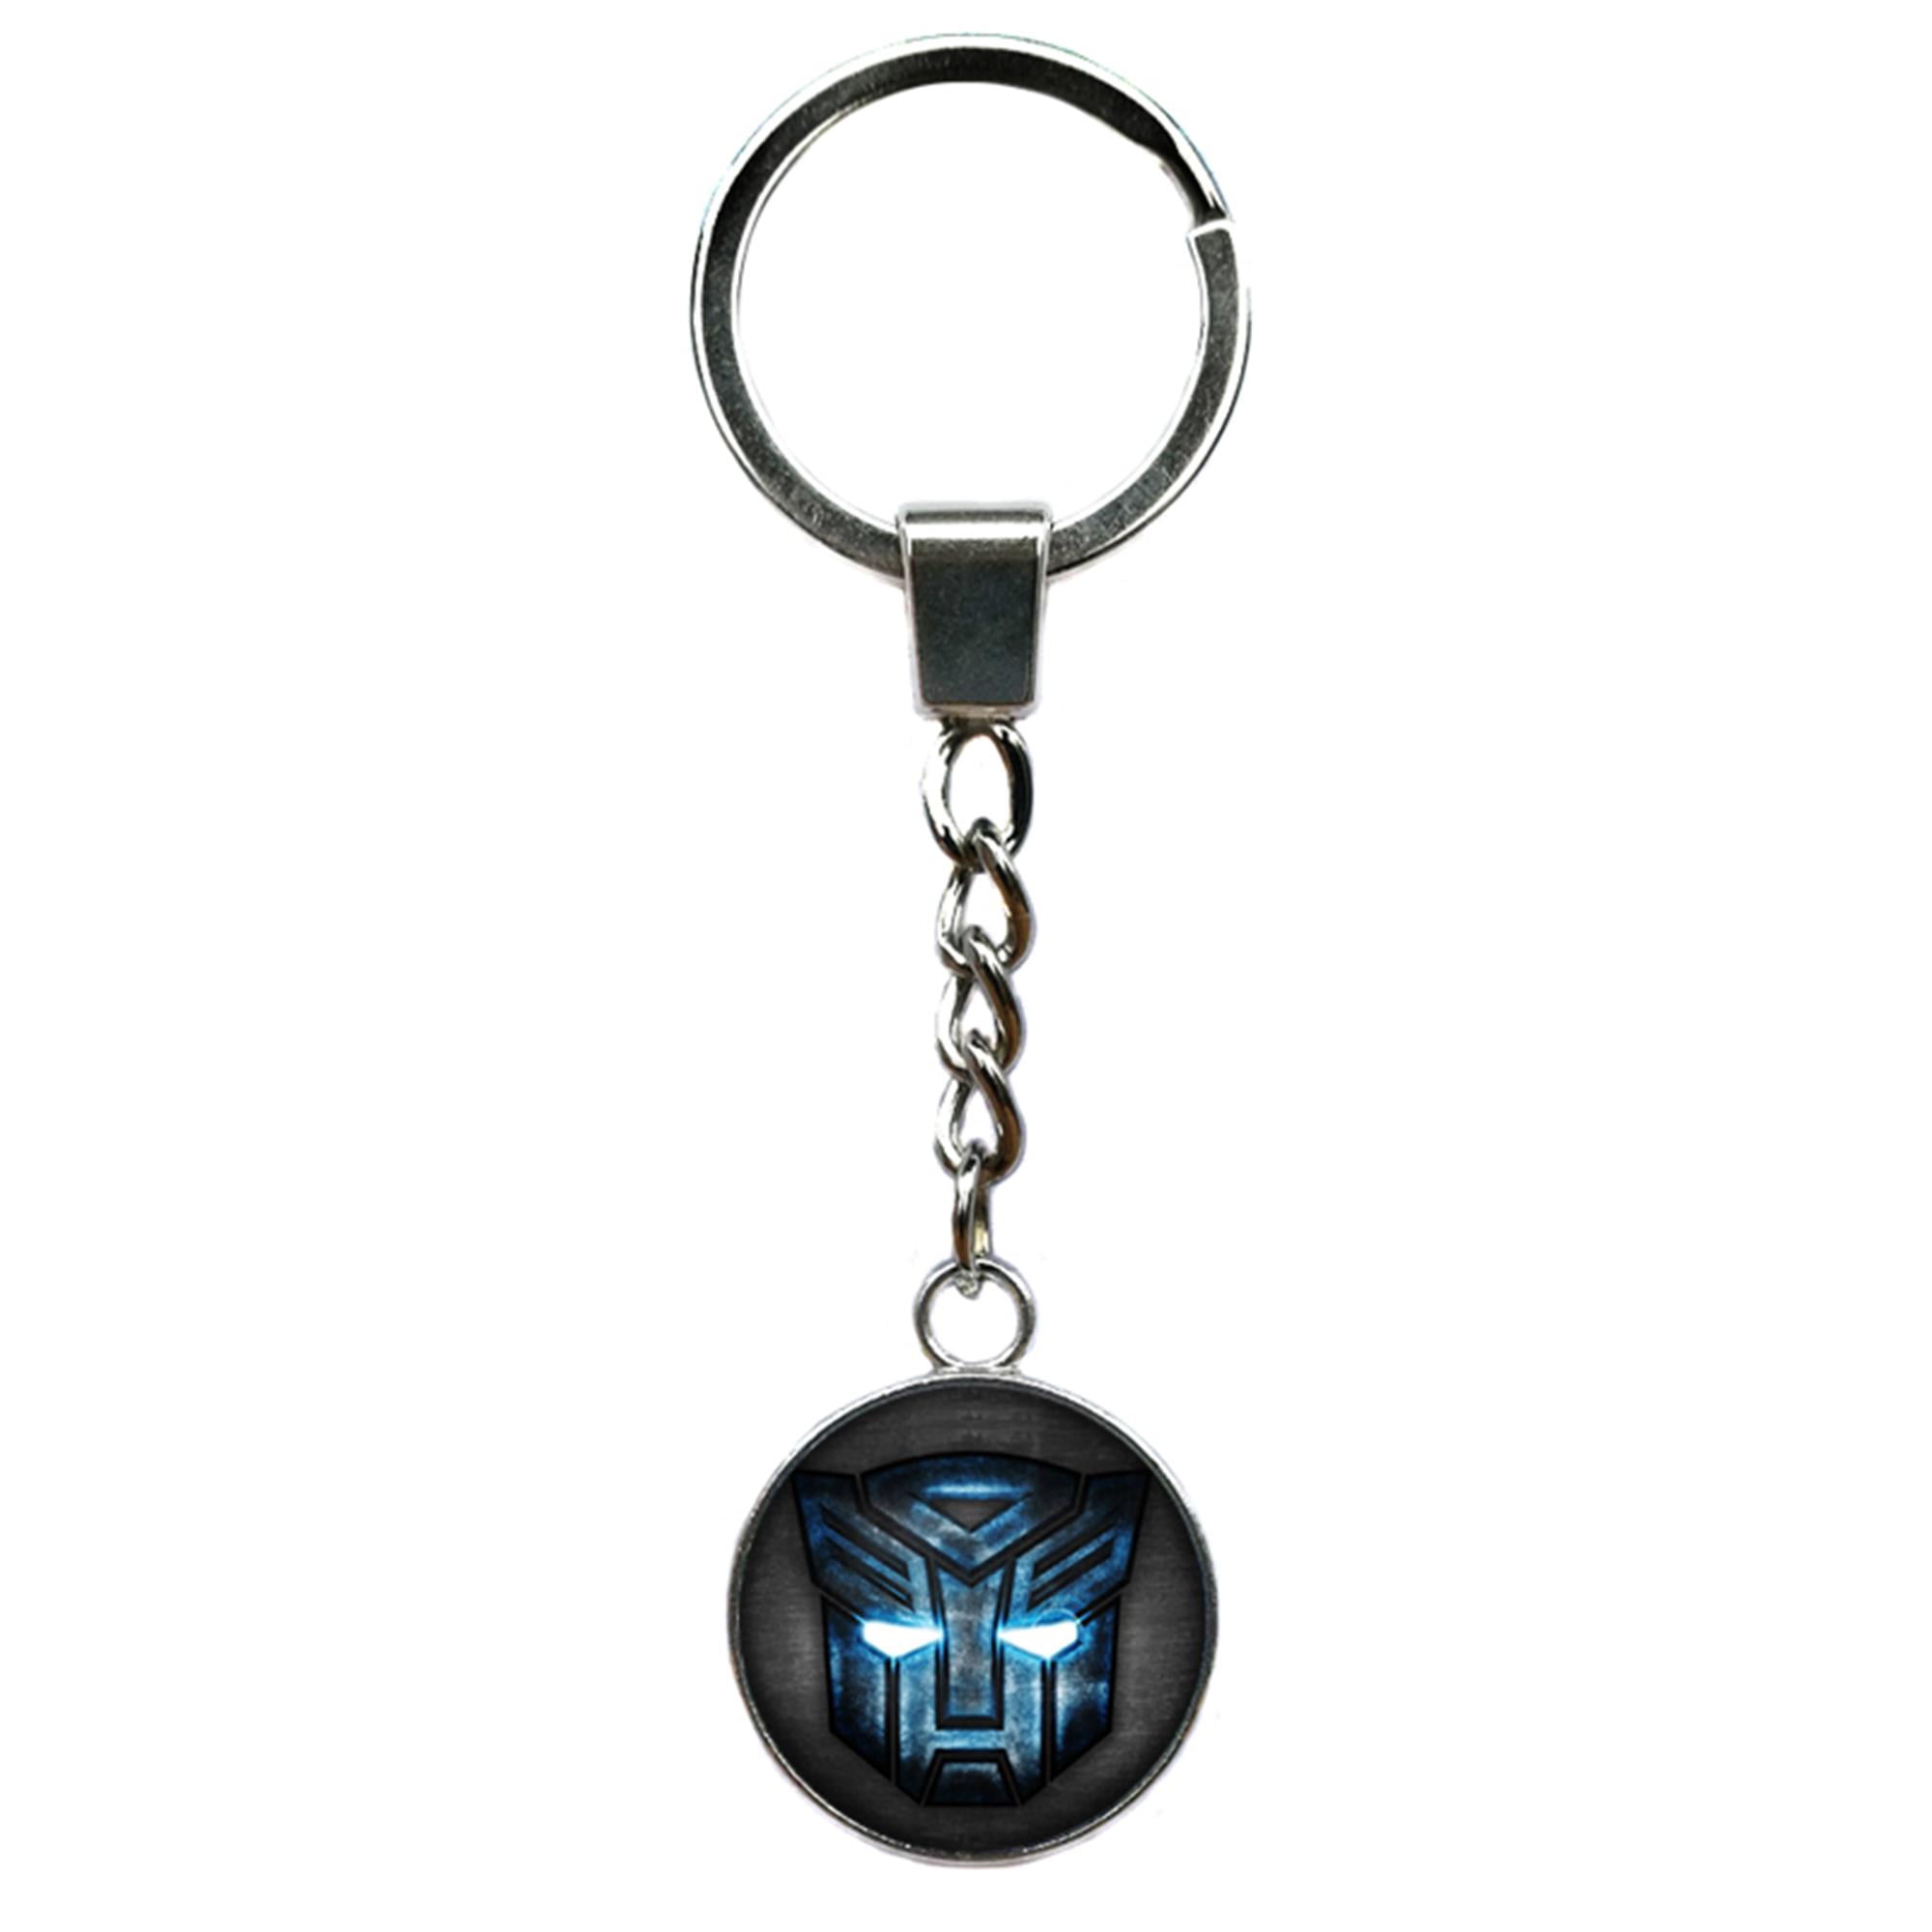 Transformers Autobots Decepticons Square Keychain Silver Keyring Pendants Gifts